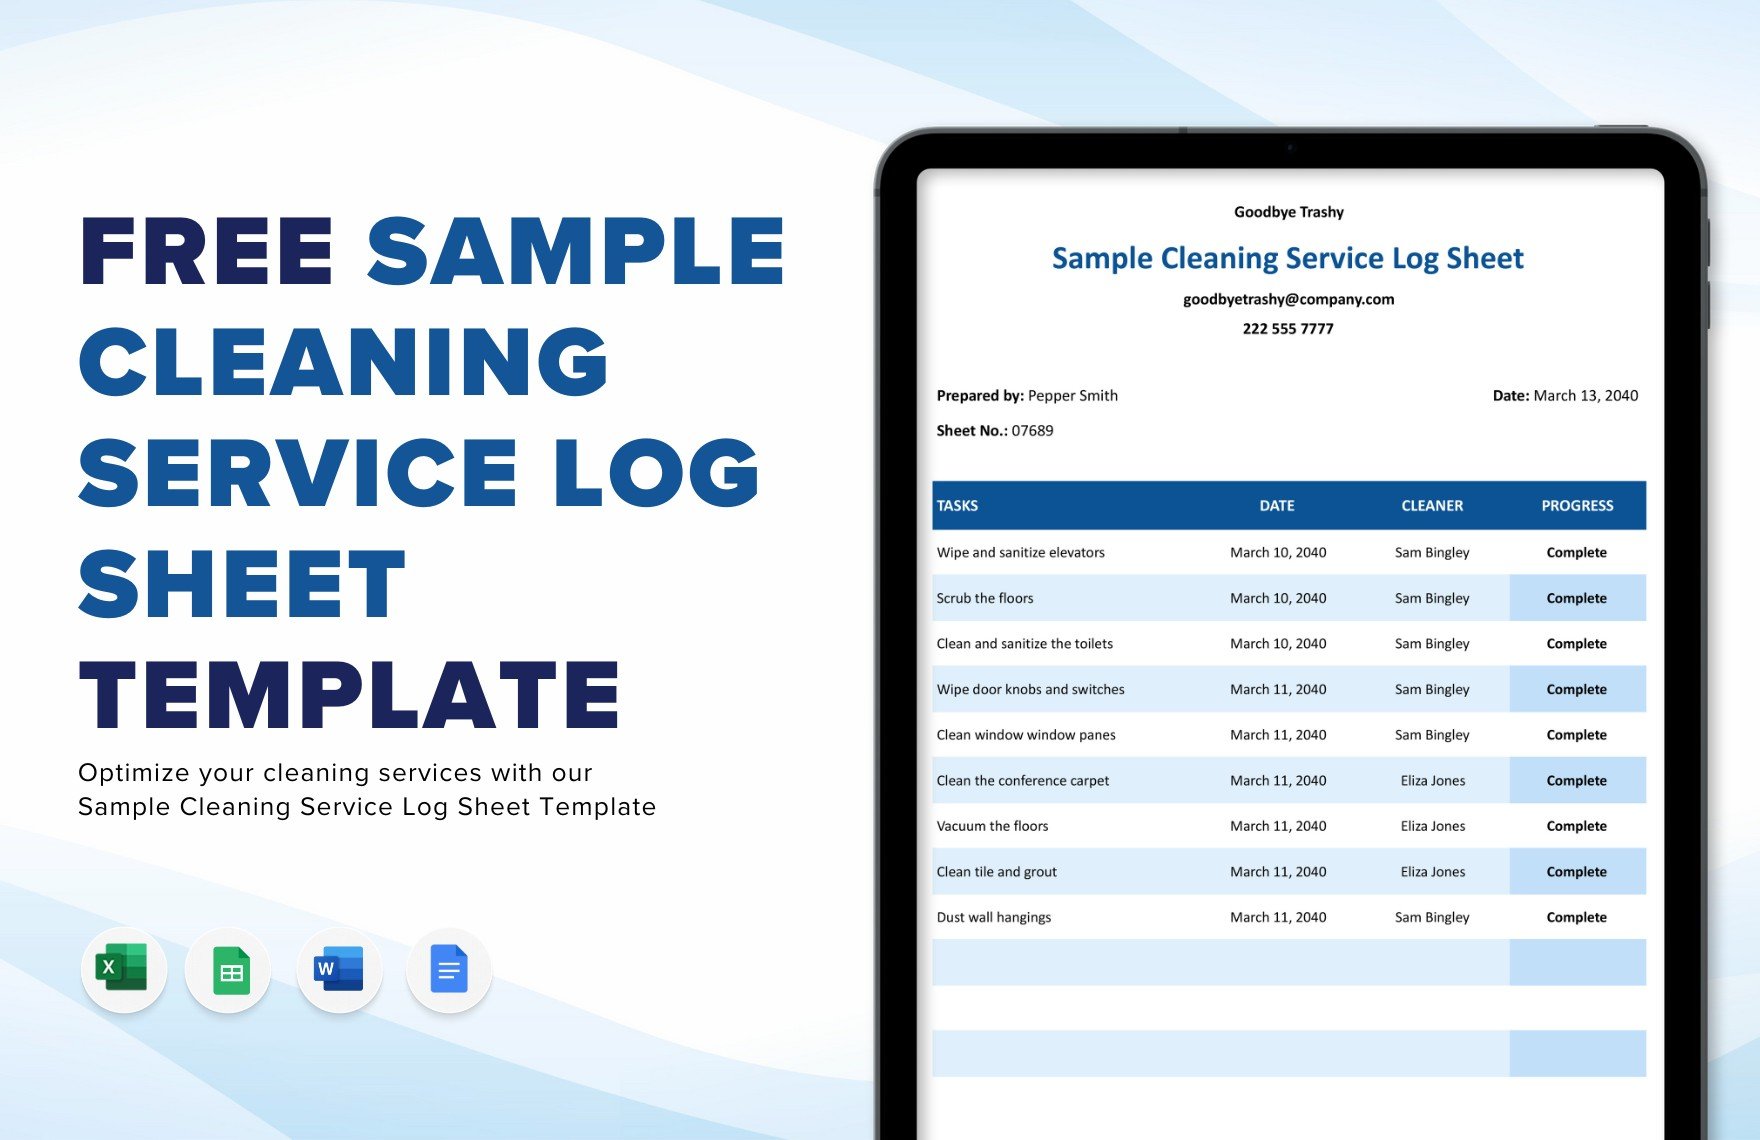 Sample Cleaning Service Log sheet Template